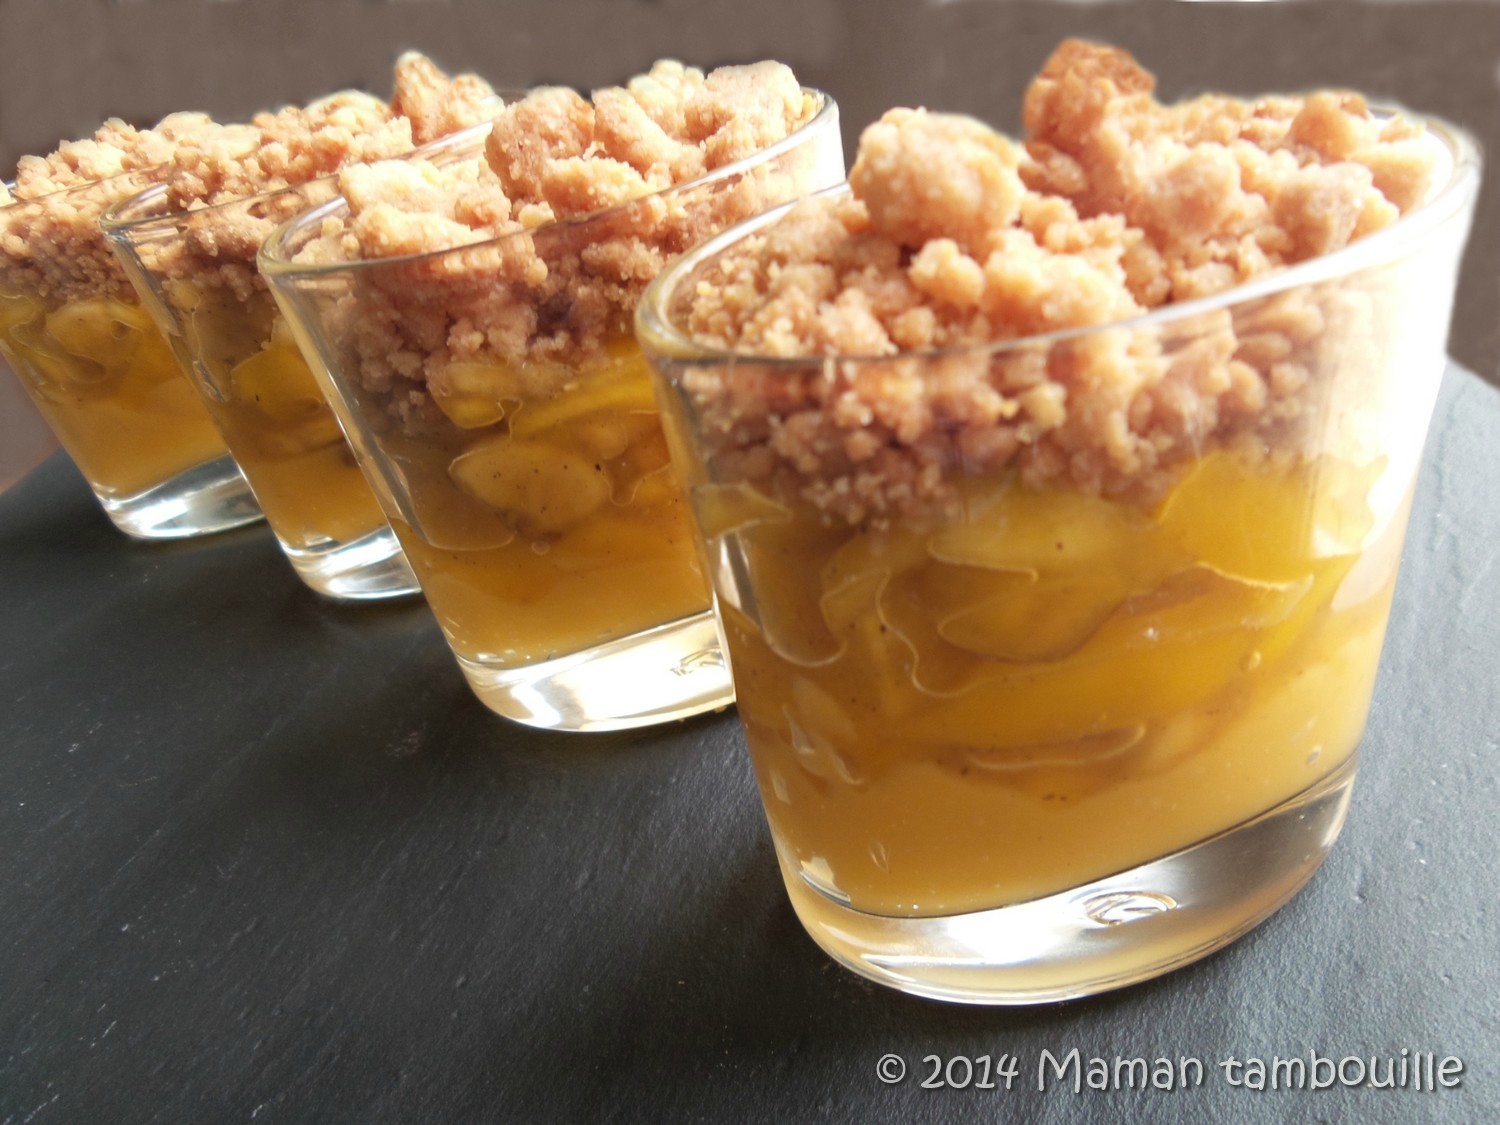 You are currently viewing Verrine mangue, passion, crumble